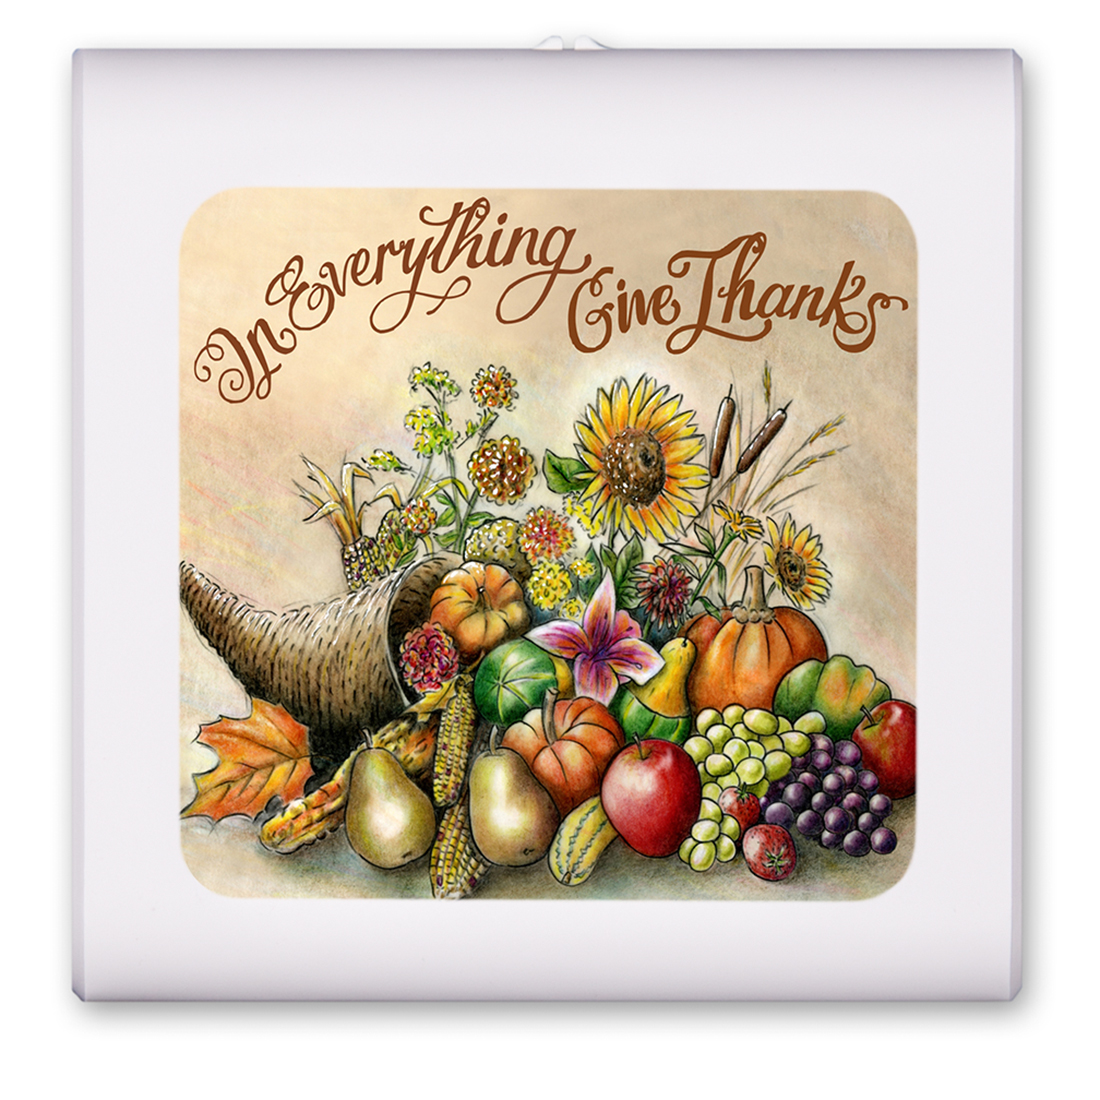 Give Thanks - #516